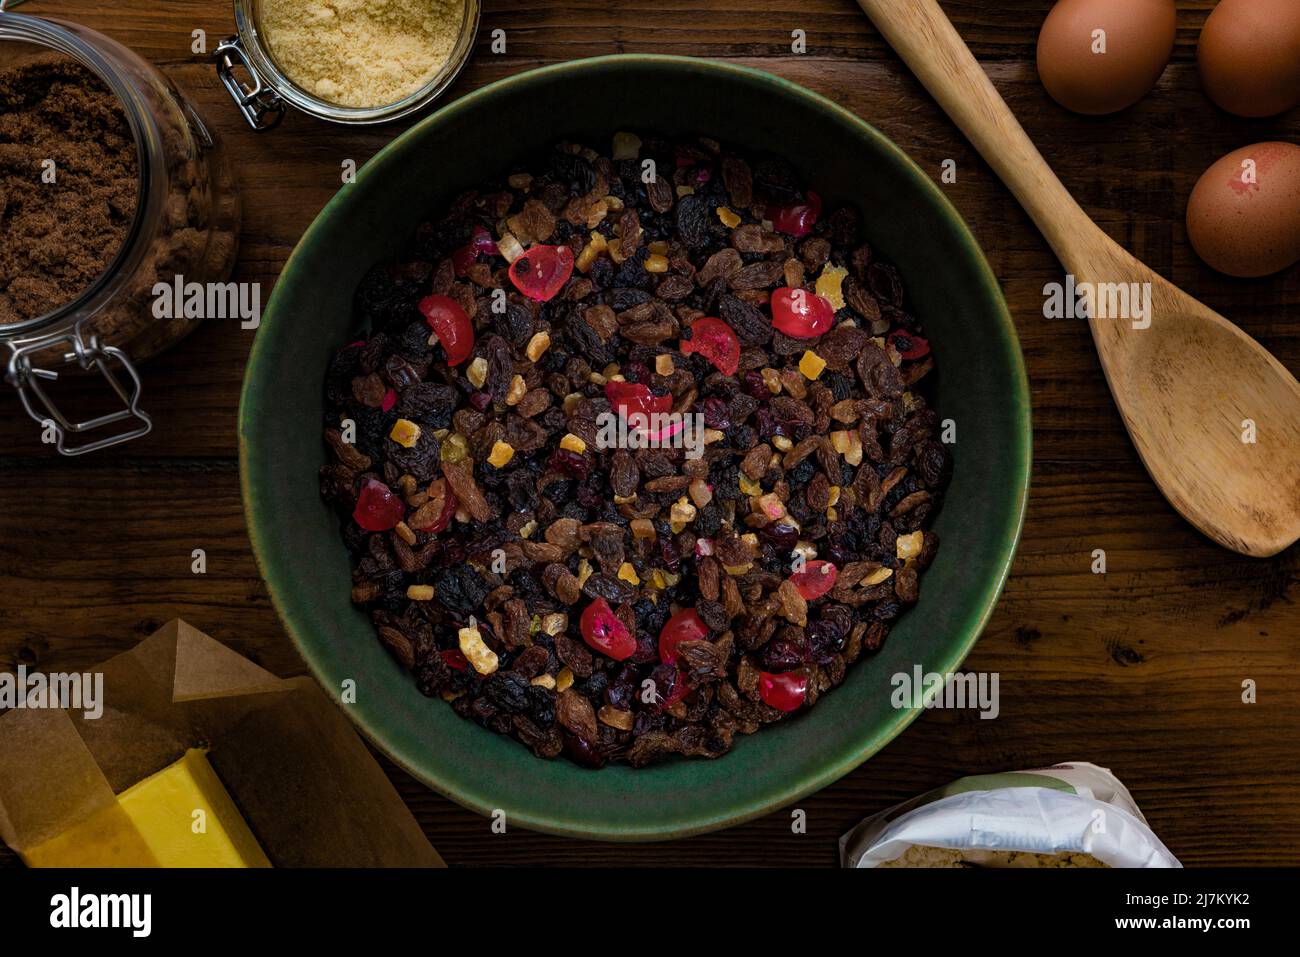 Flat lay composition on a dark wooden table of ingredients ready to make a fruit cake. Stock Photo